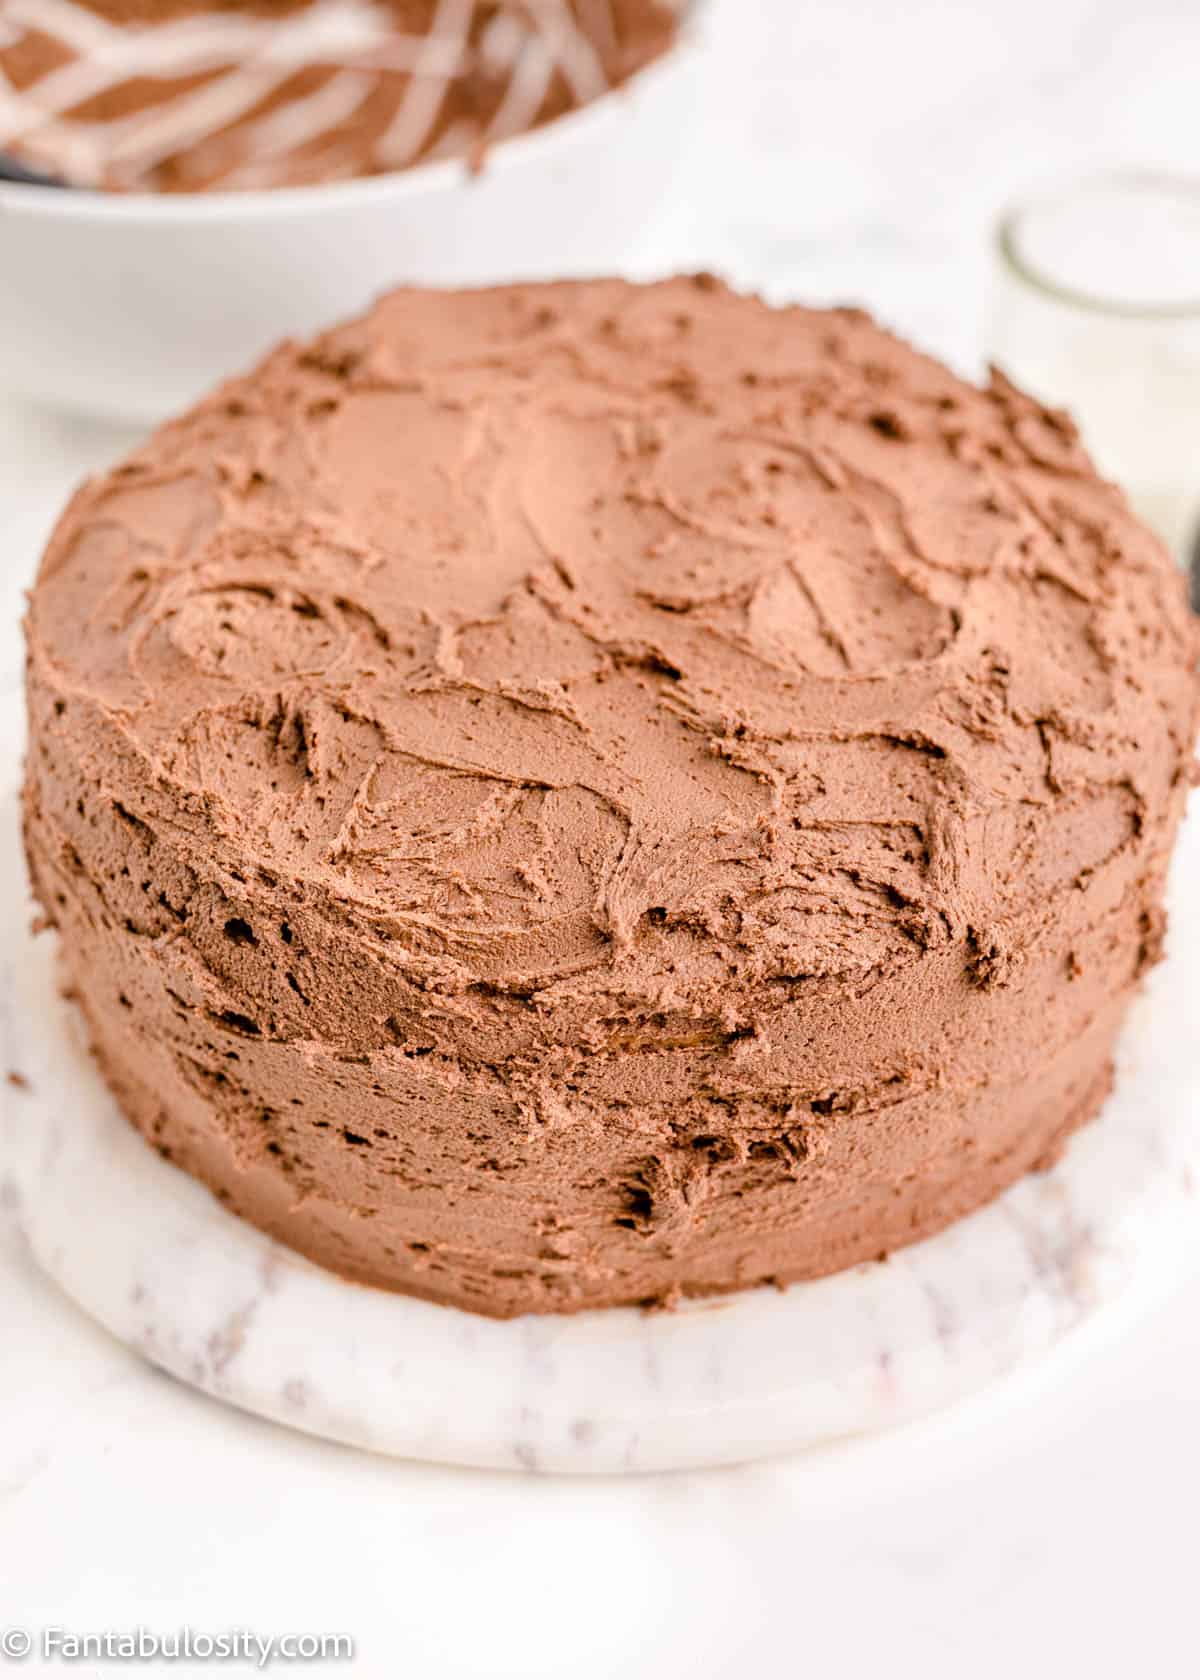 Cake covered with chocolate buttercream frosting